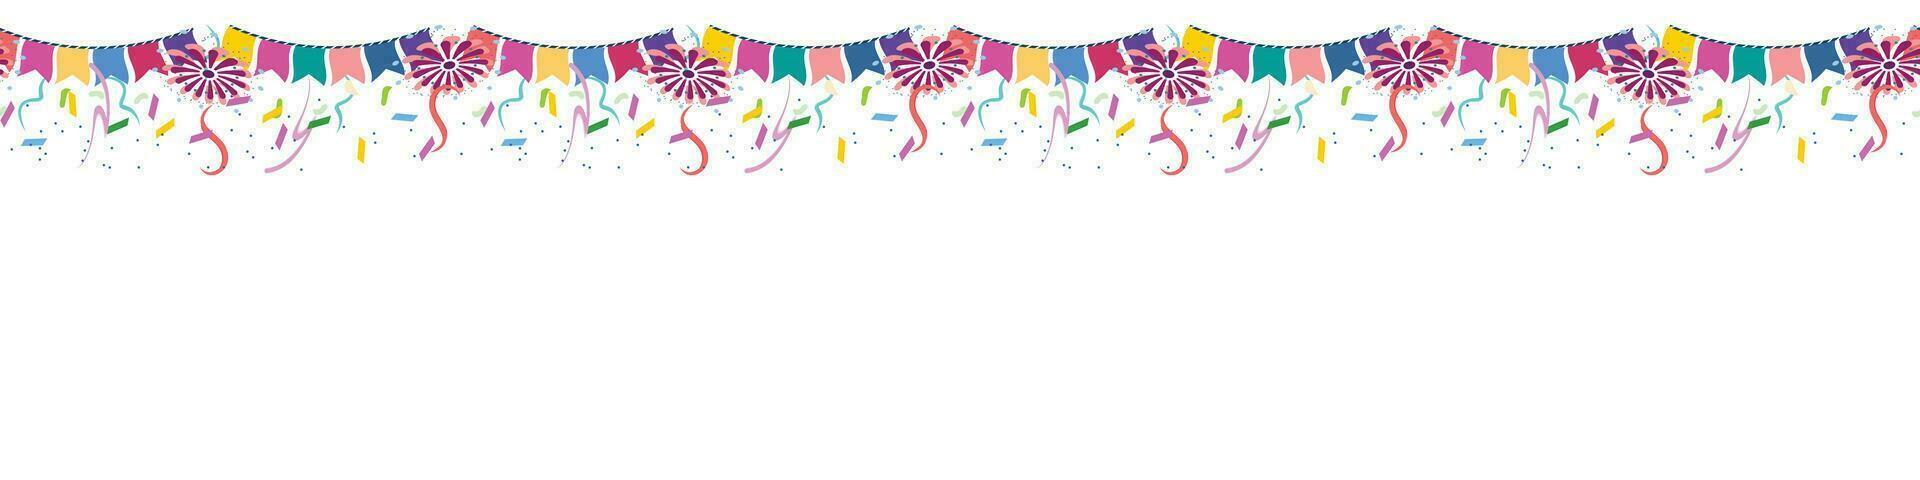 Carnival background with confetti, garland and fireworks vector